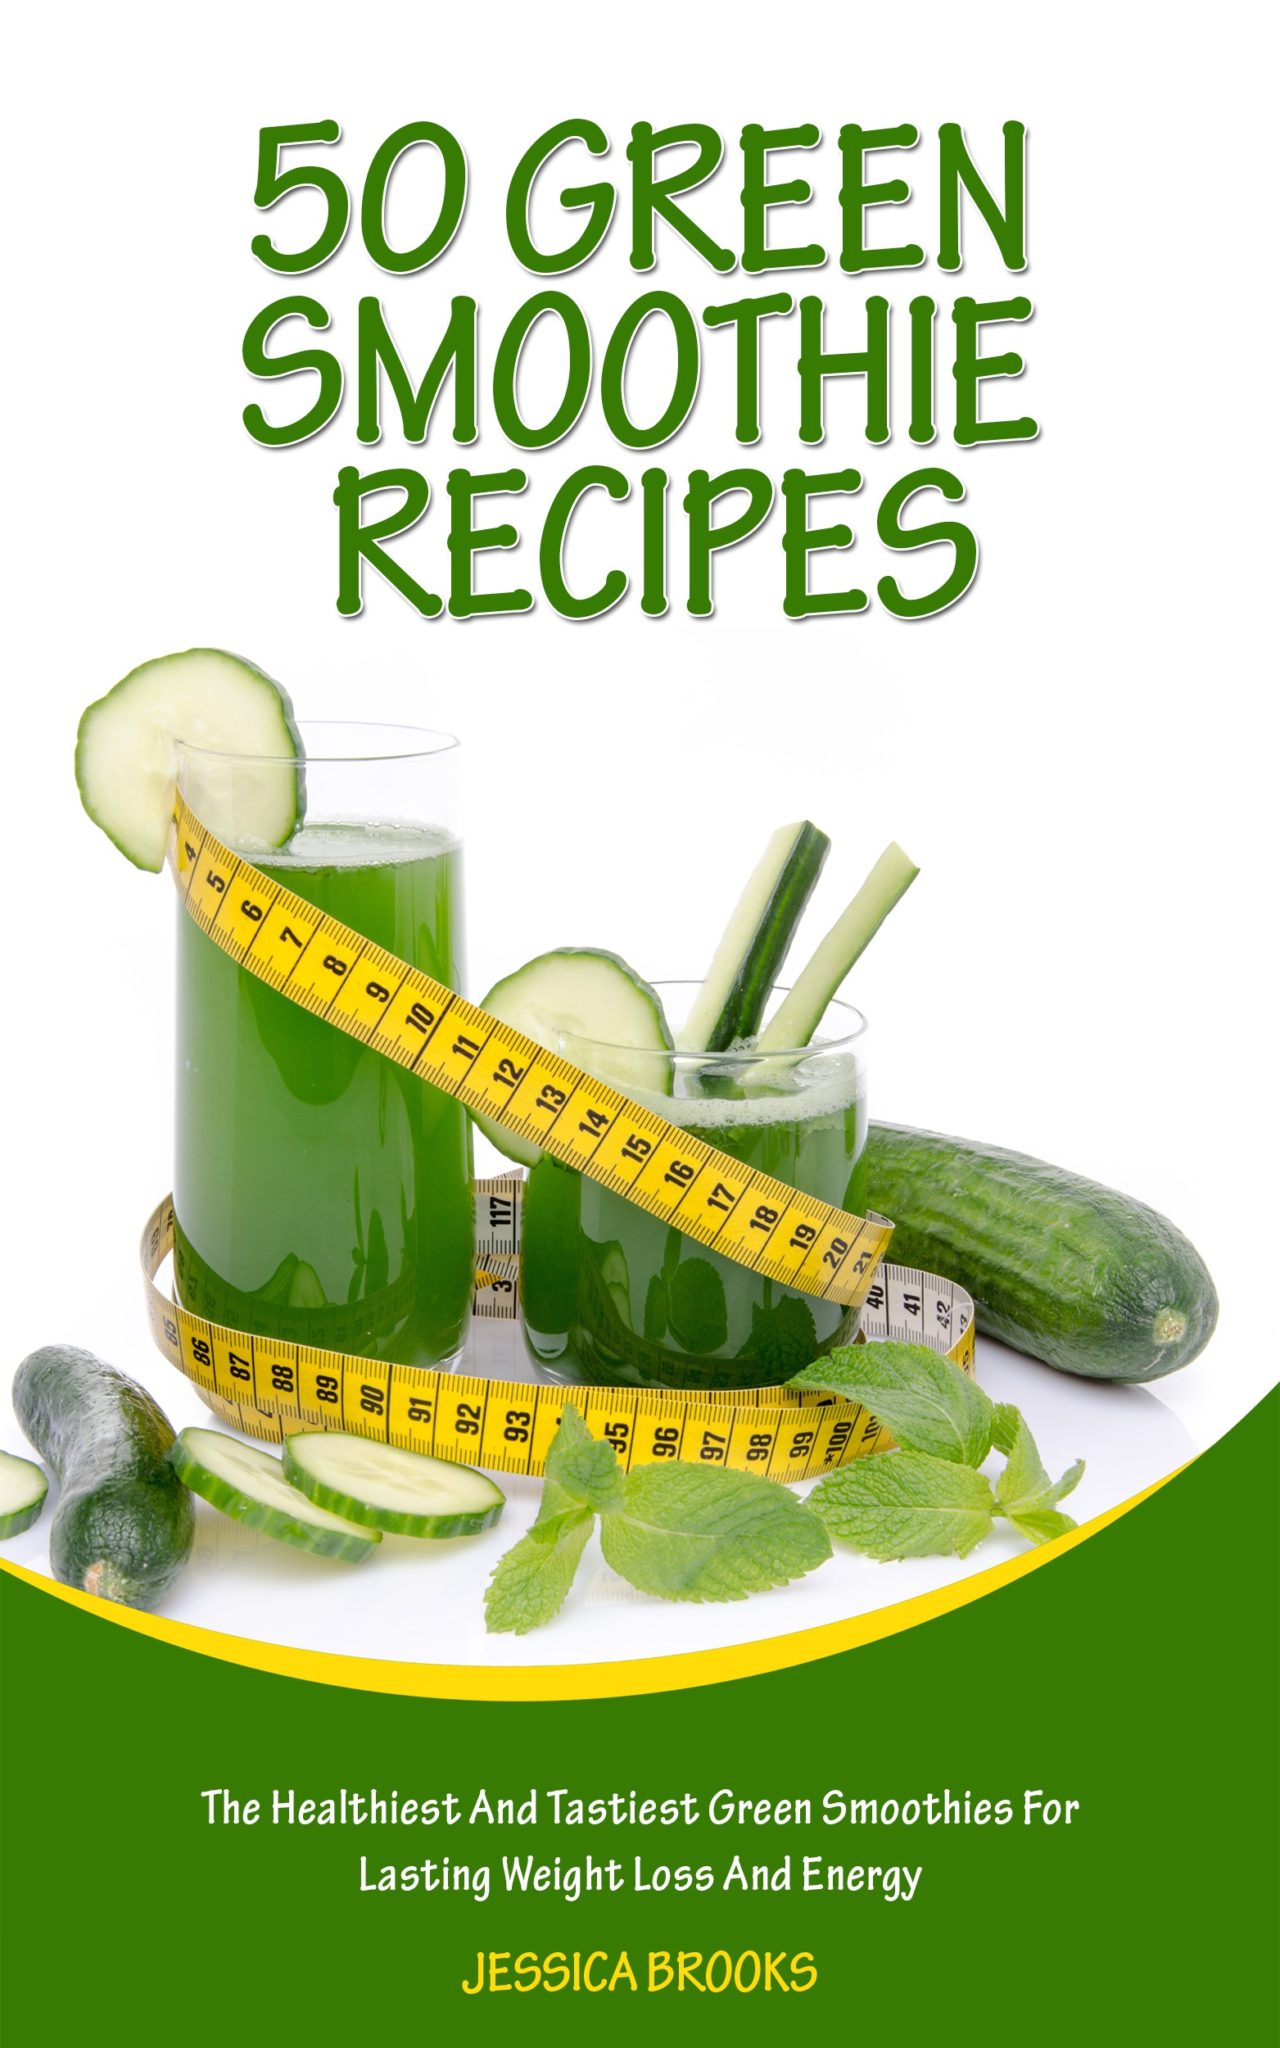 FREE: Green Smoothies: 50 Green Smoothie Recipes: The Healthiest And Tastiest Green Smoothies For Lasting Weight Loss And Energy (Smoothies, Vegetarian, Vegan, … Smoothie Recipes, Juicing Book 1) by Jessica Brooks